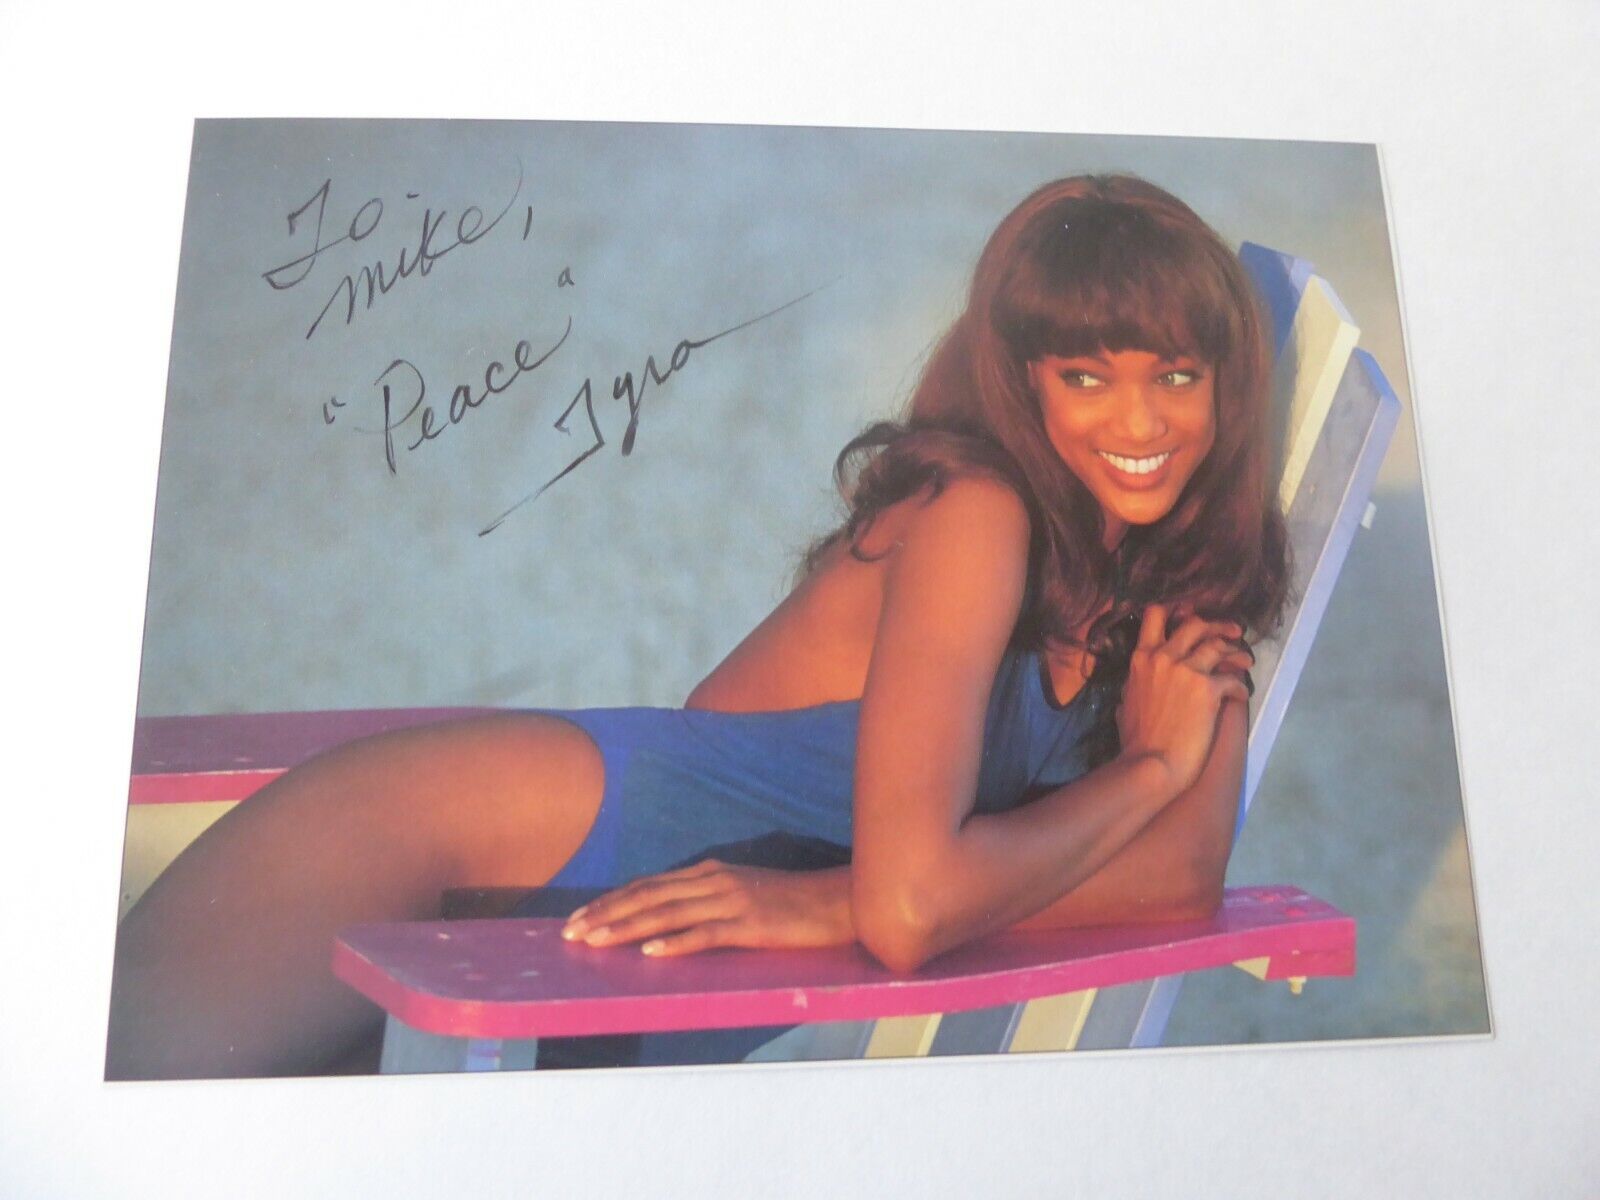 BUSTY YOUNG SUPERMODEL TYRA BANKS AUTHENTIC AUTOGRAPHED BEAUTIFUL PHOTO